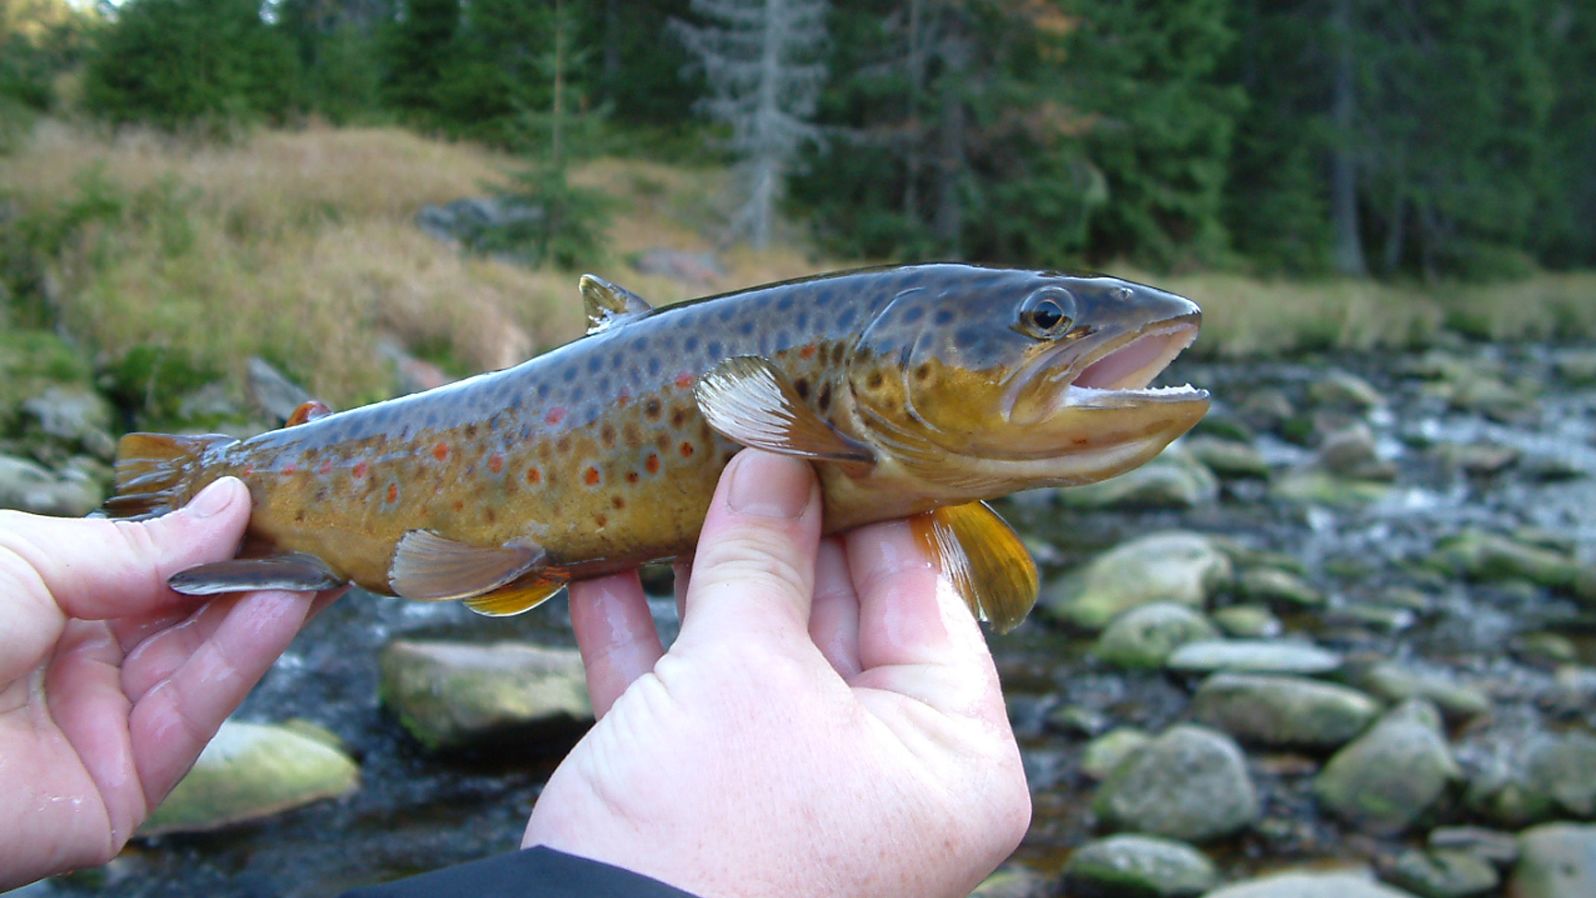 Brown trout suffered withdrawal after being exposed to methamphetamine, researchers found.